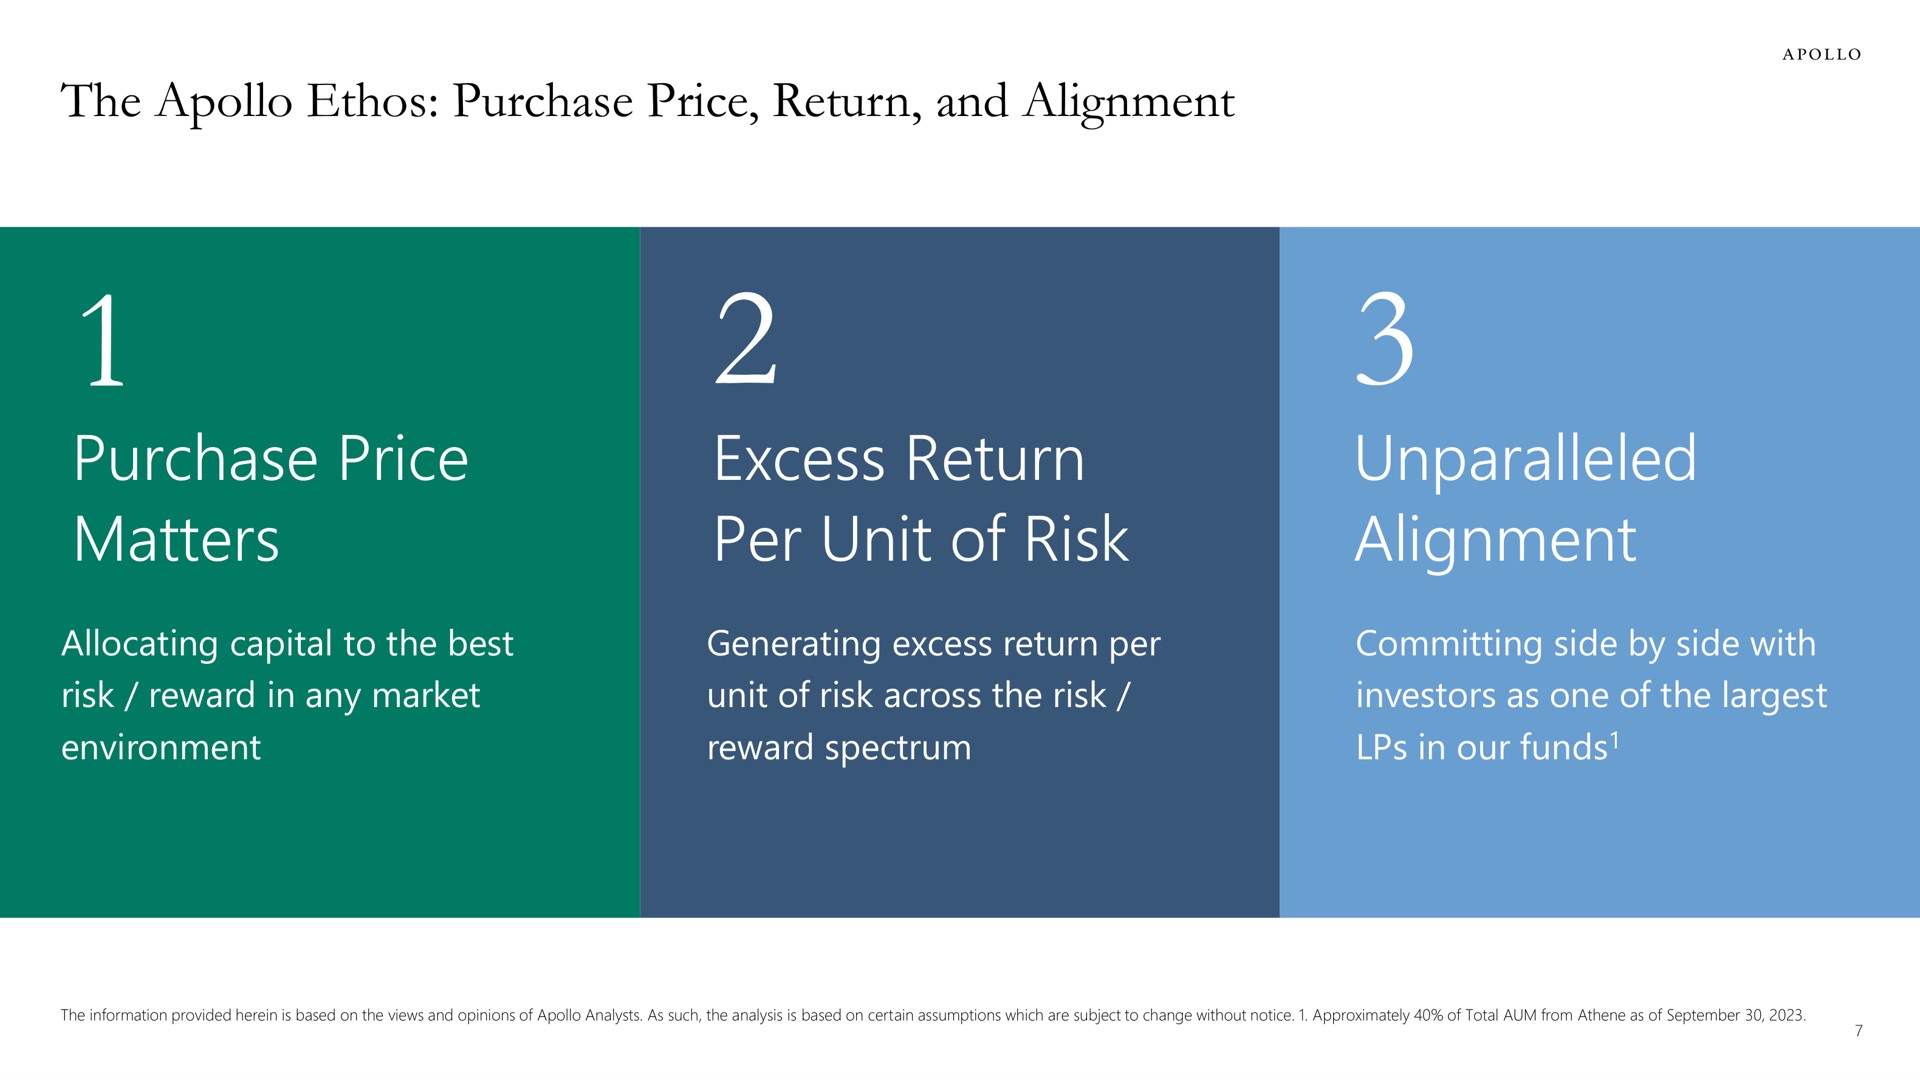 the ethos purchase price return and alignment purchase price matters excess return per unit of risk unparalleled alignment | Apollo Global Management